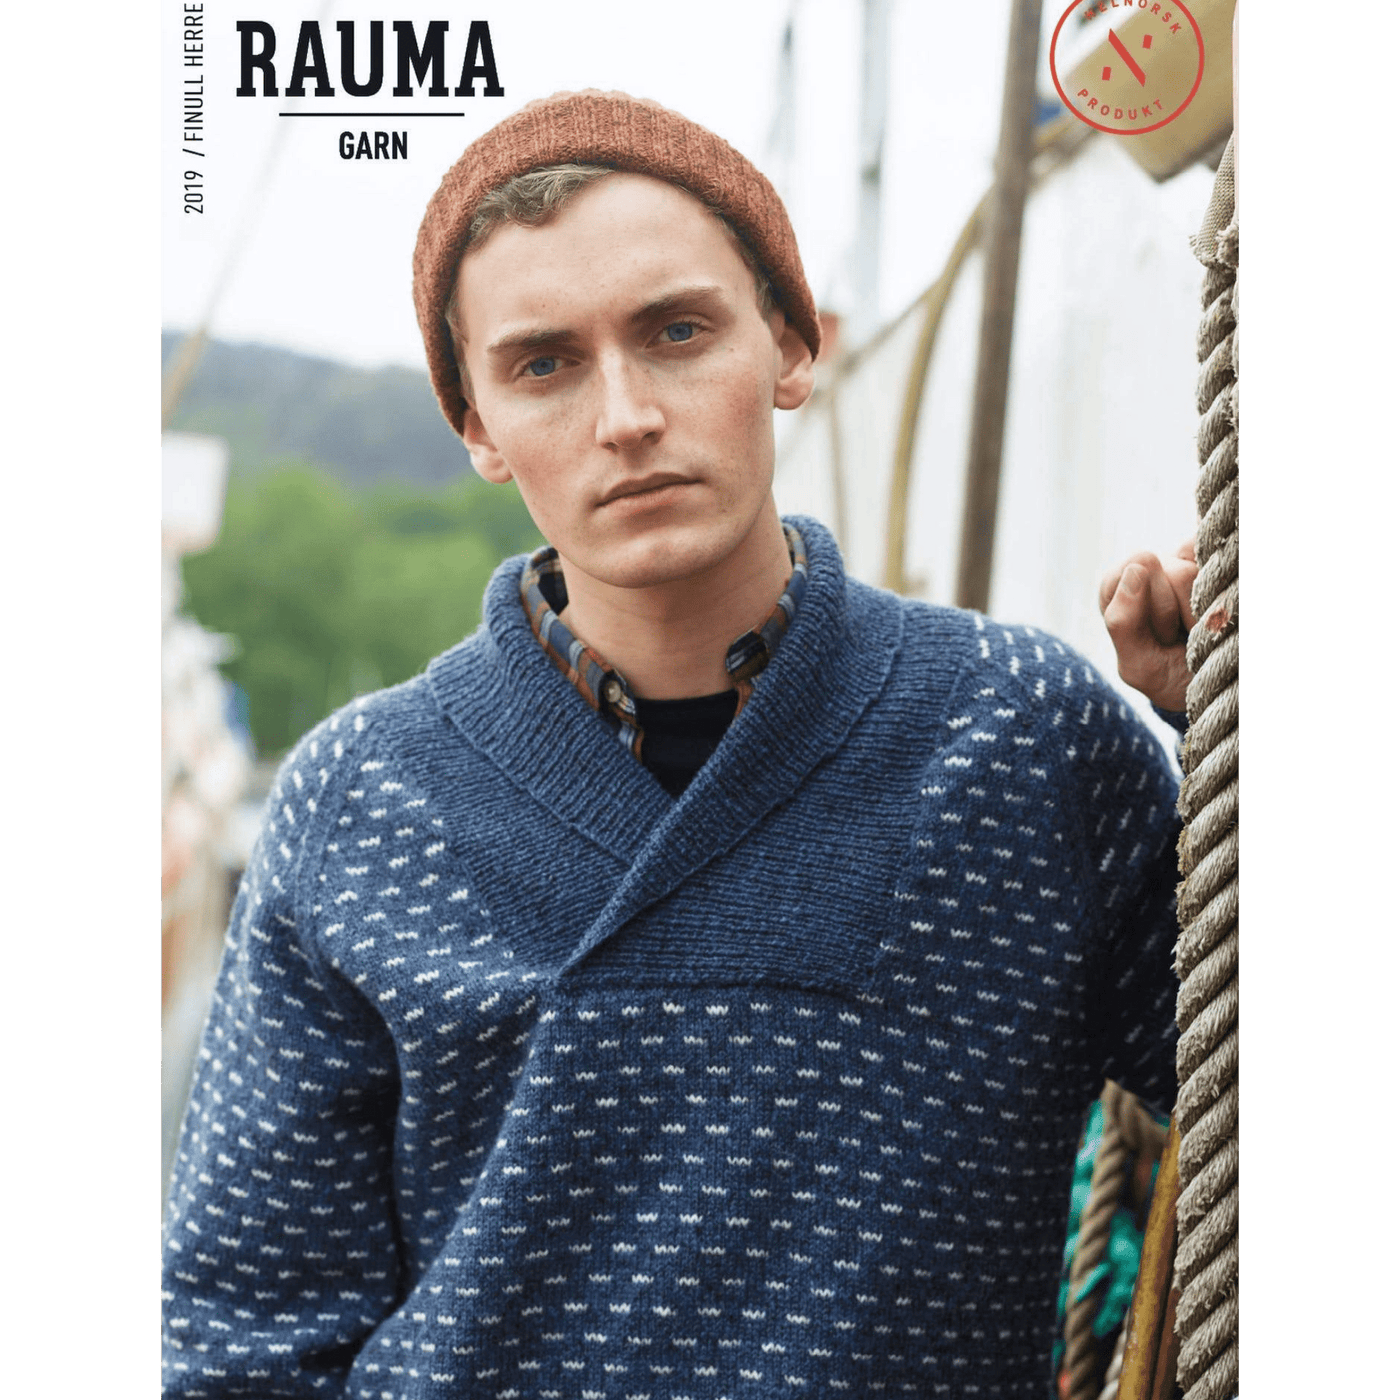 Man wearing knitted blue and cream patterned sweater and burnt orange hat from Rauma Finullgarn Herre pattern book from the Woolly Thistle